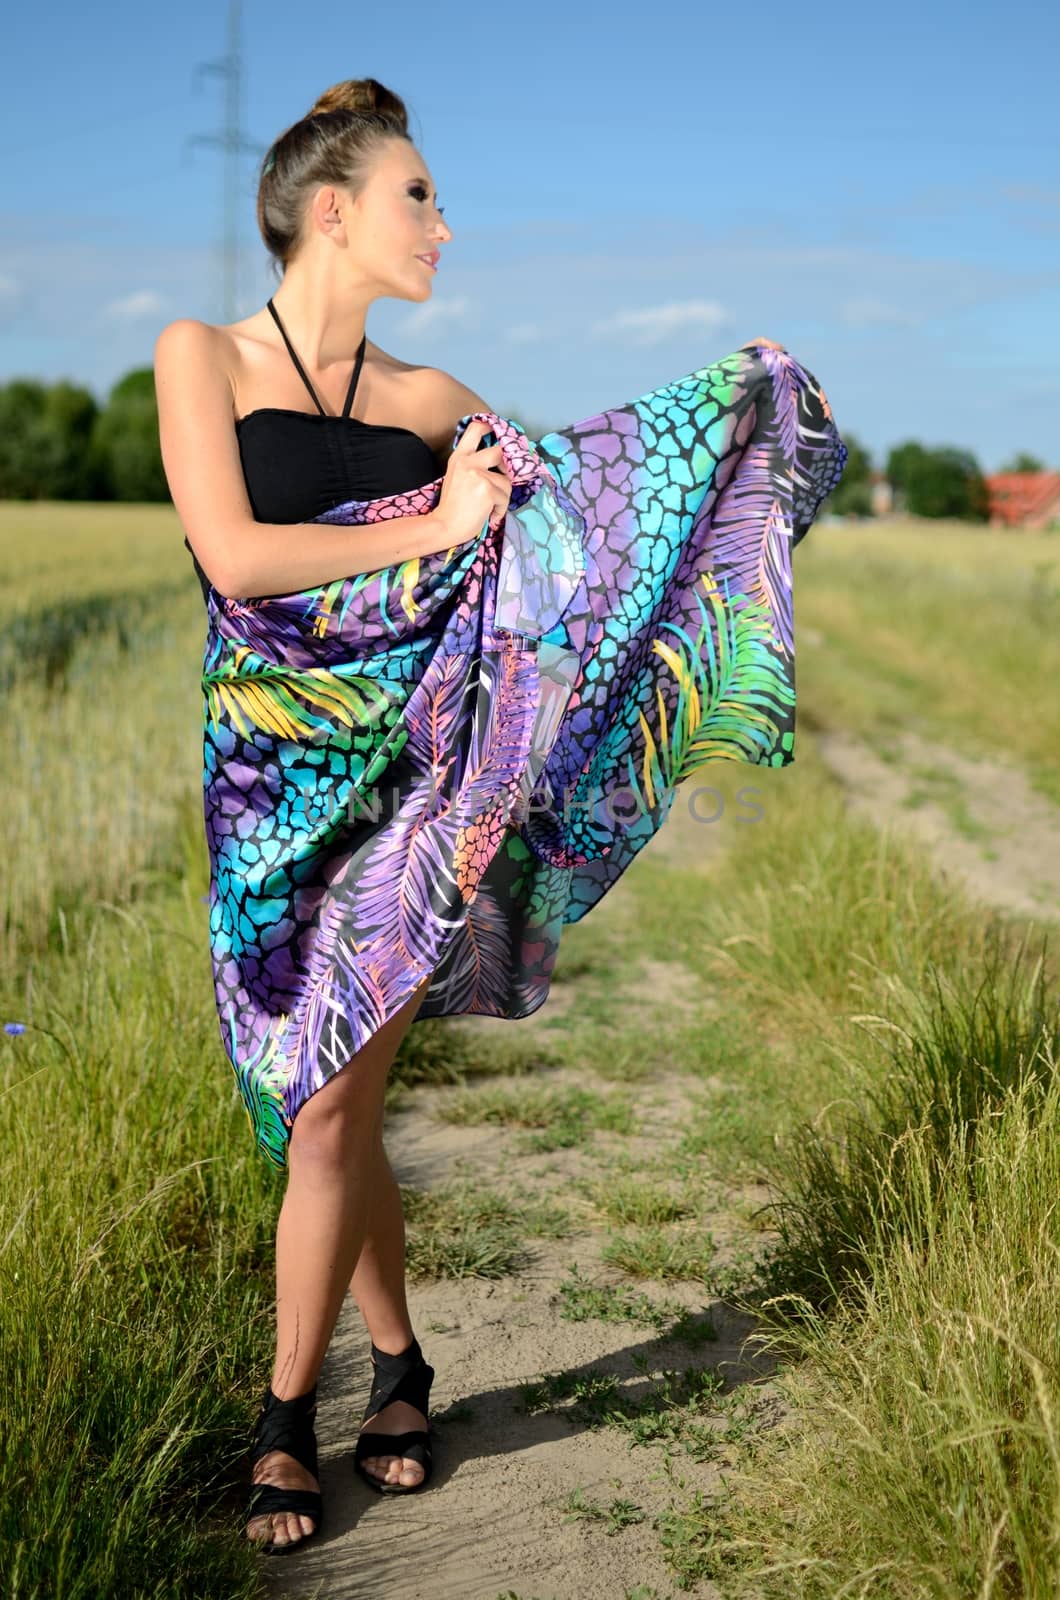 Young female model spins around. Charming girl from Poland, dynamic photo with colorful dress. Green fields and blue sky as background.